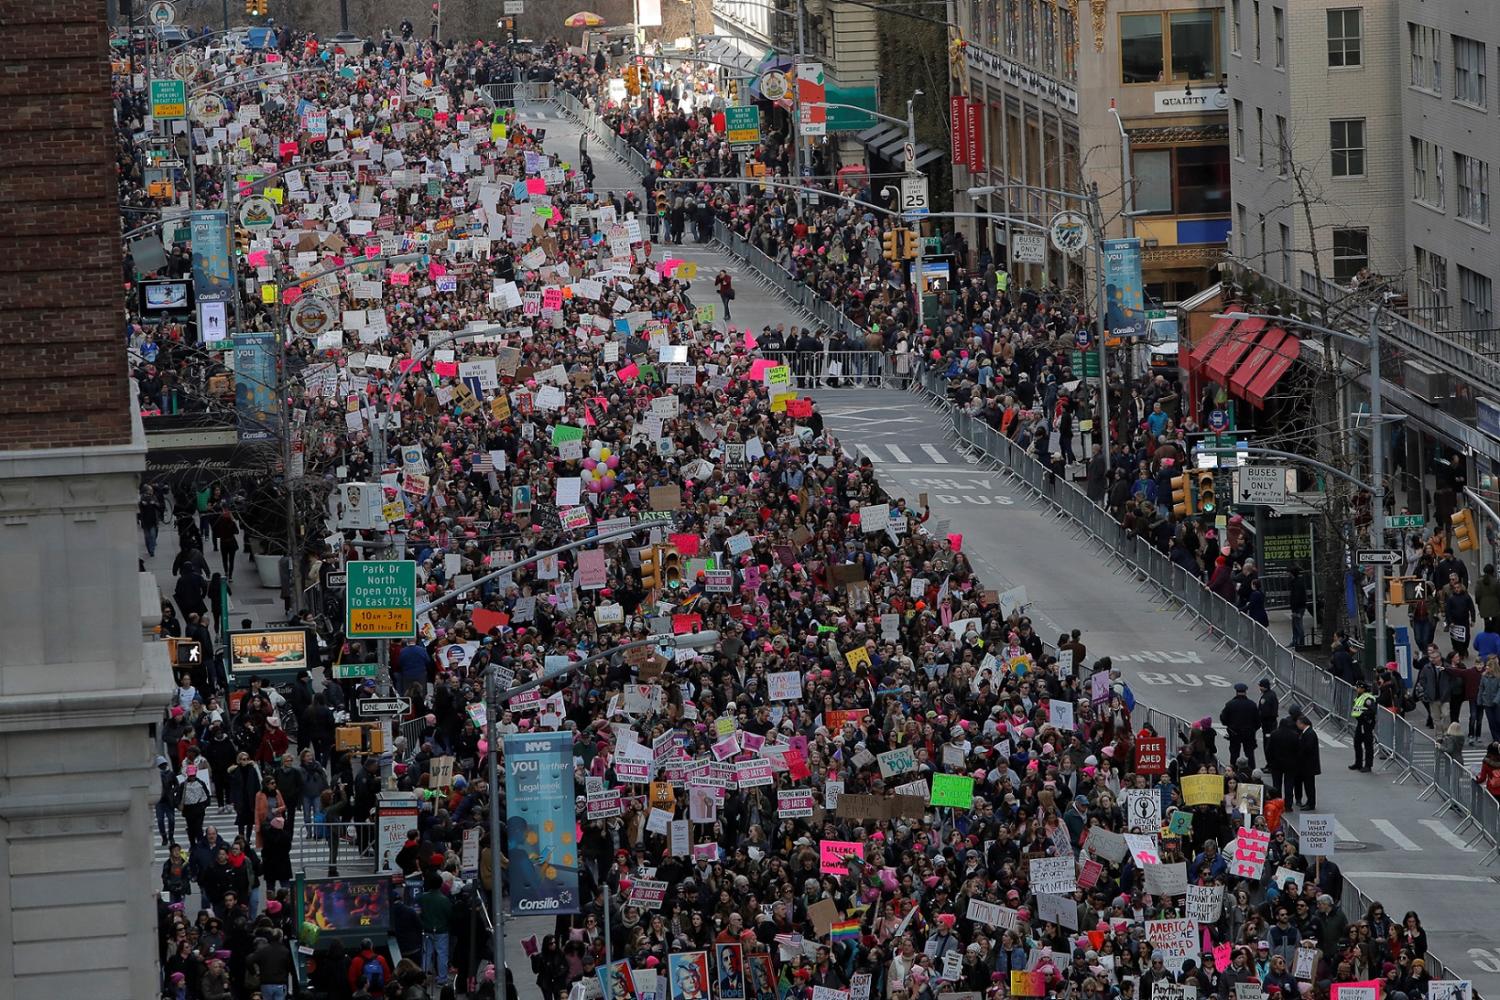 People walk down Sixth Avenue as they participate in the Women's March in Manhattan, New York City, New York, U.S., January 20, 2018. REUTERS/Andrew Kelly - RC1878B29720